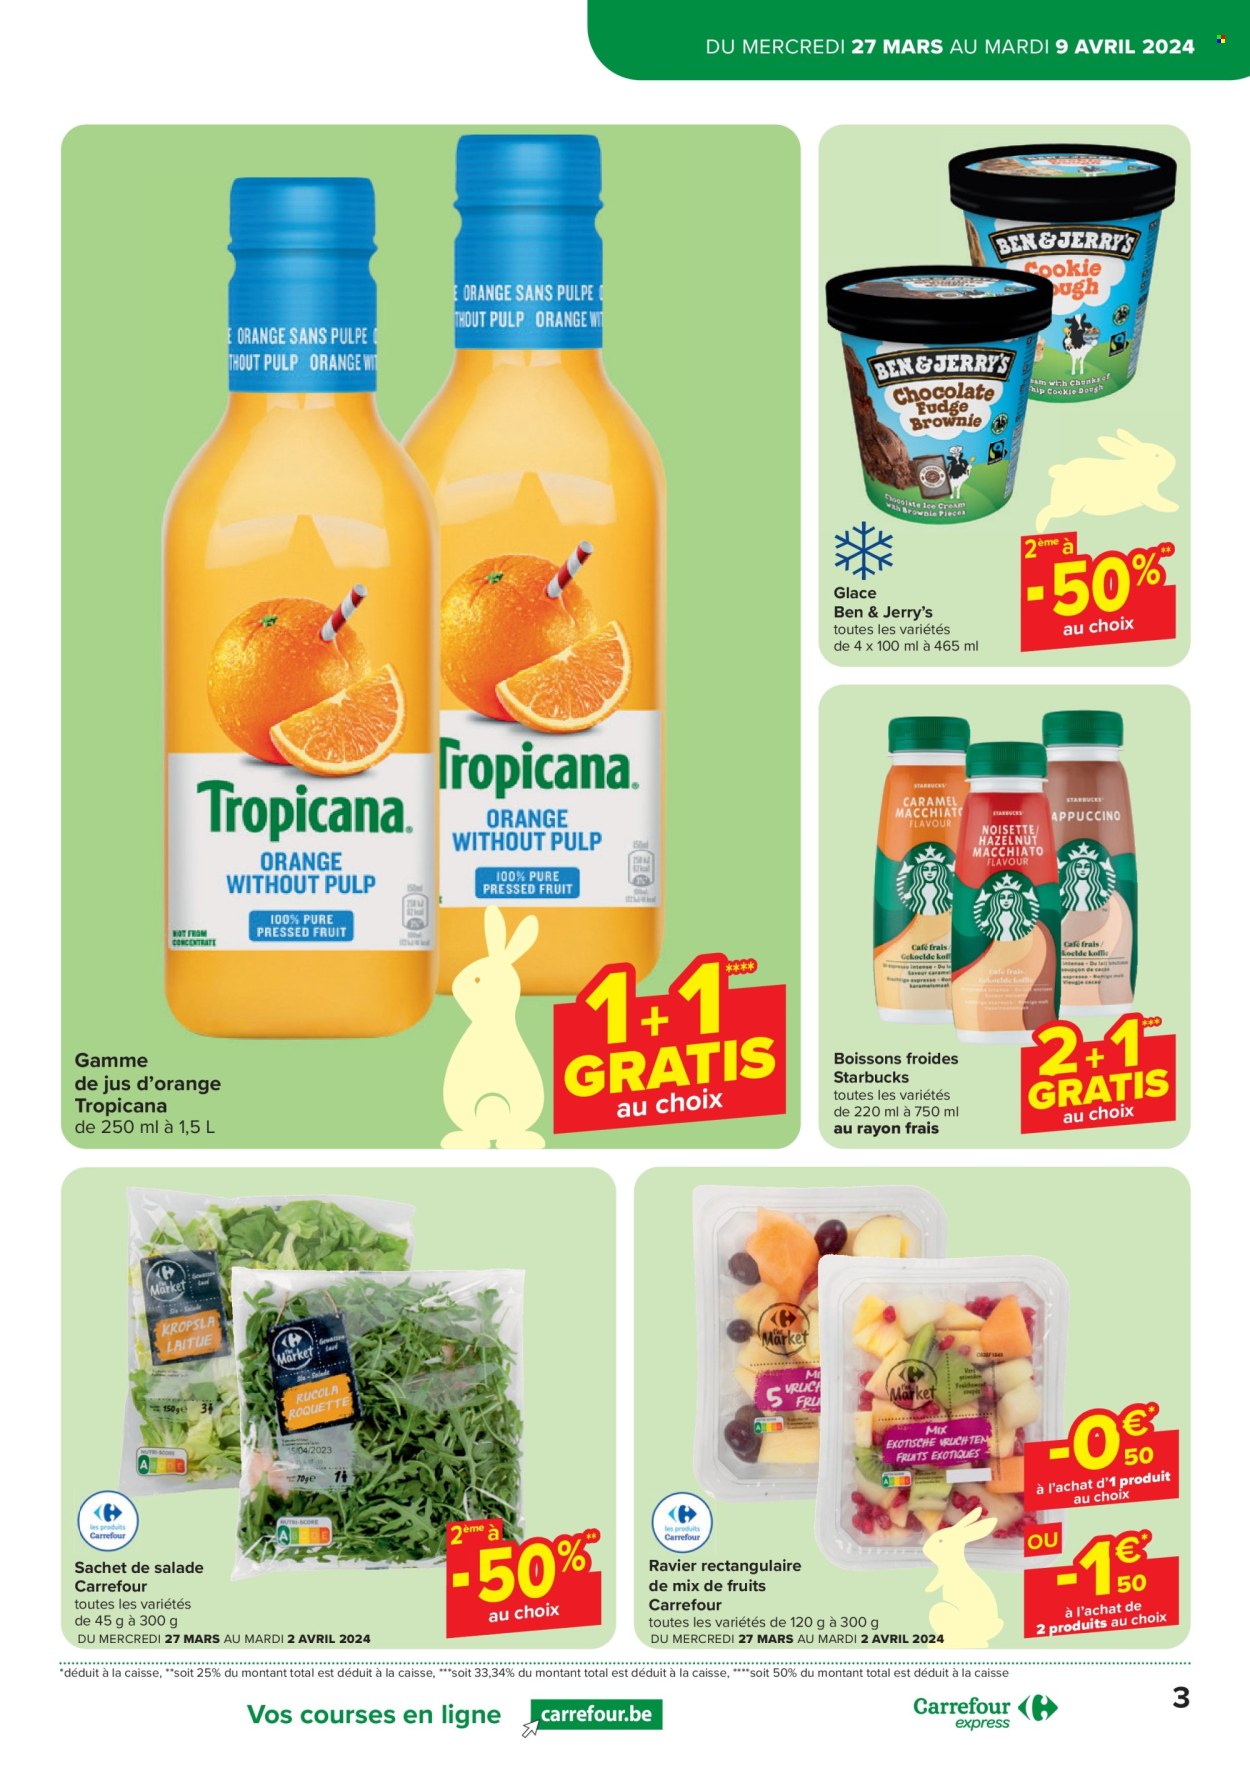 Catalogue Carrefour express - 27.3.2024 - 2.4.2024. Page 3.